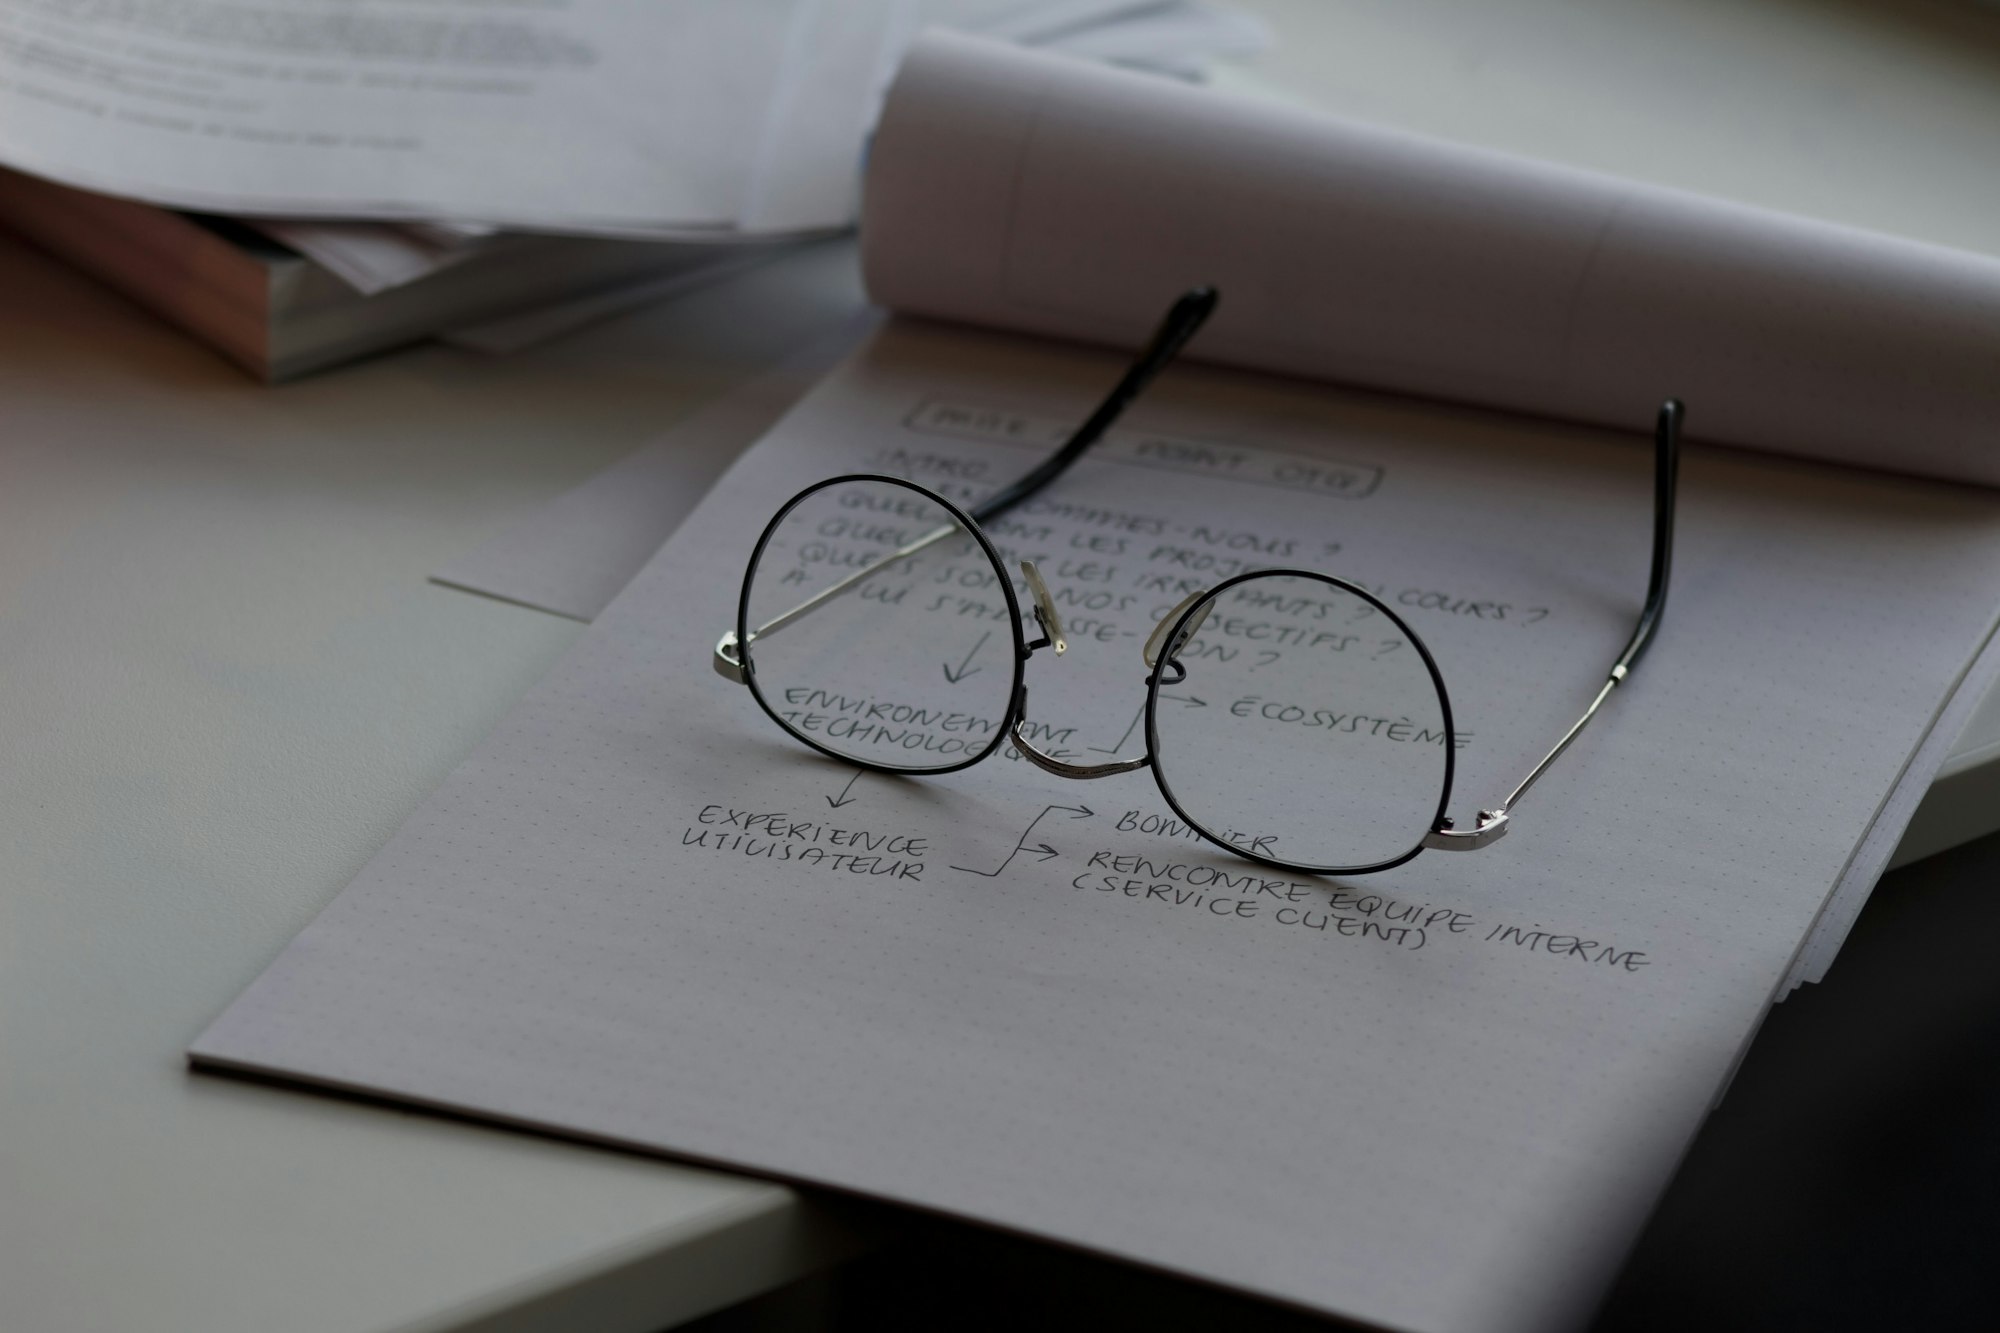 Notebook with documentation and glasses